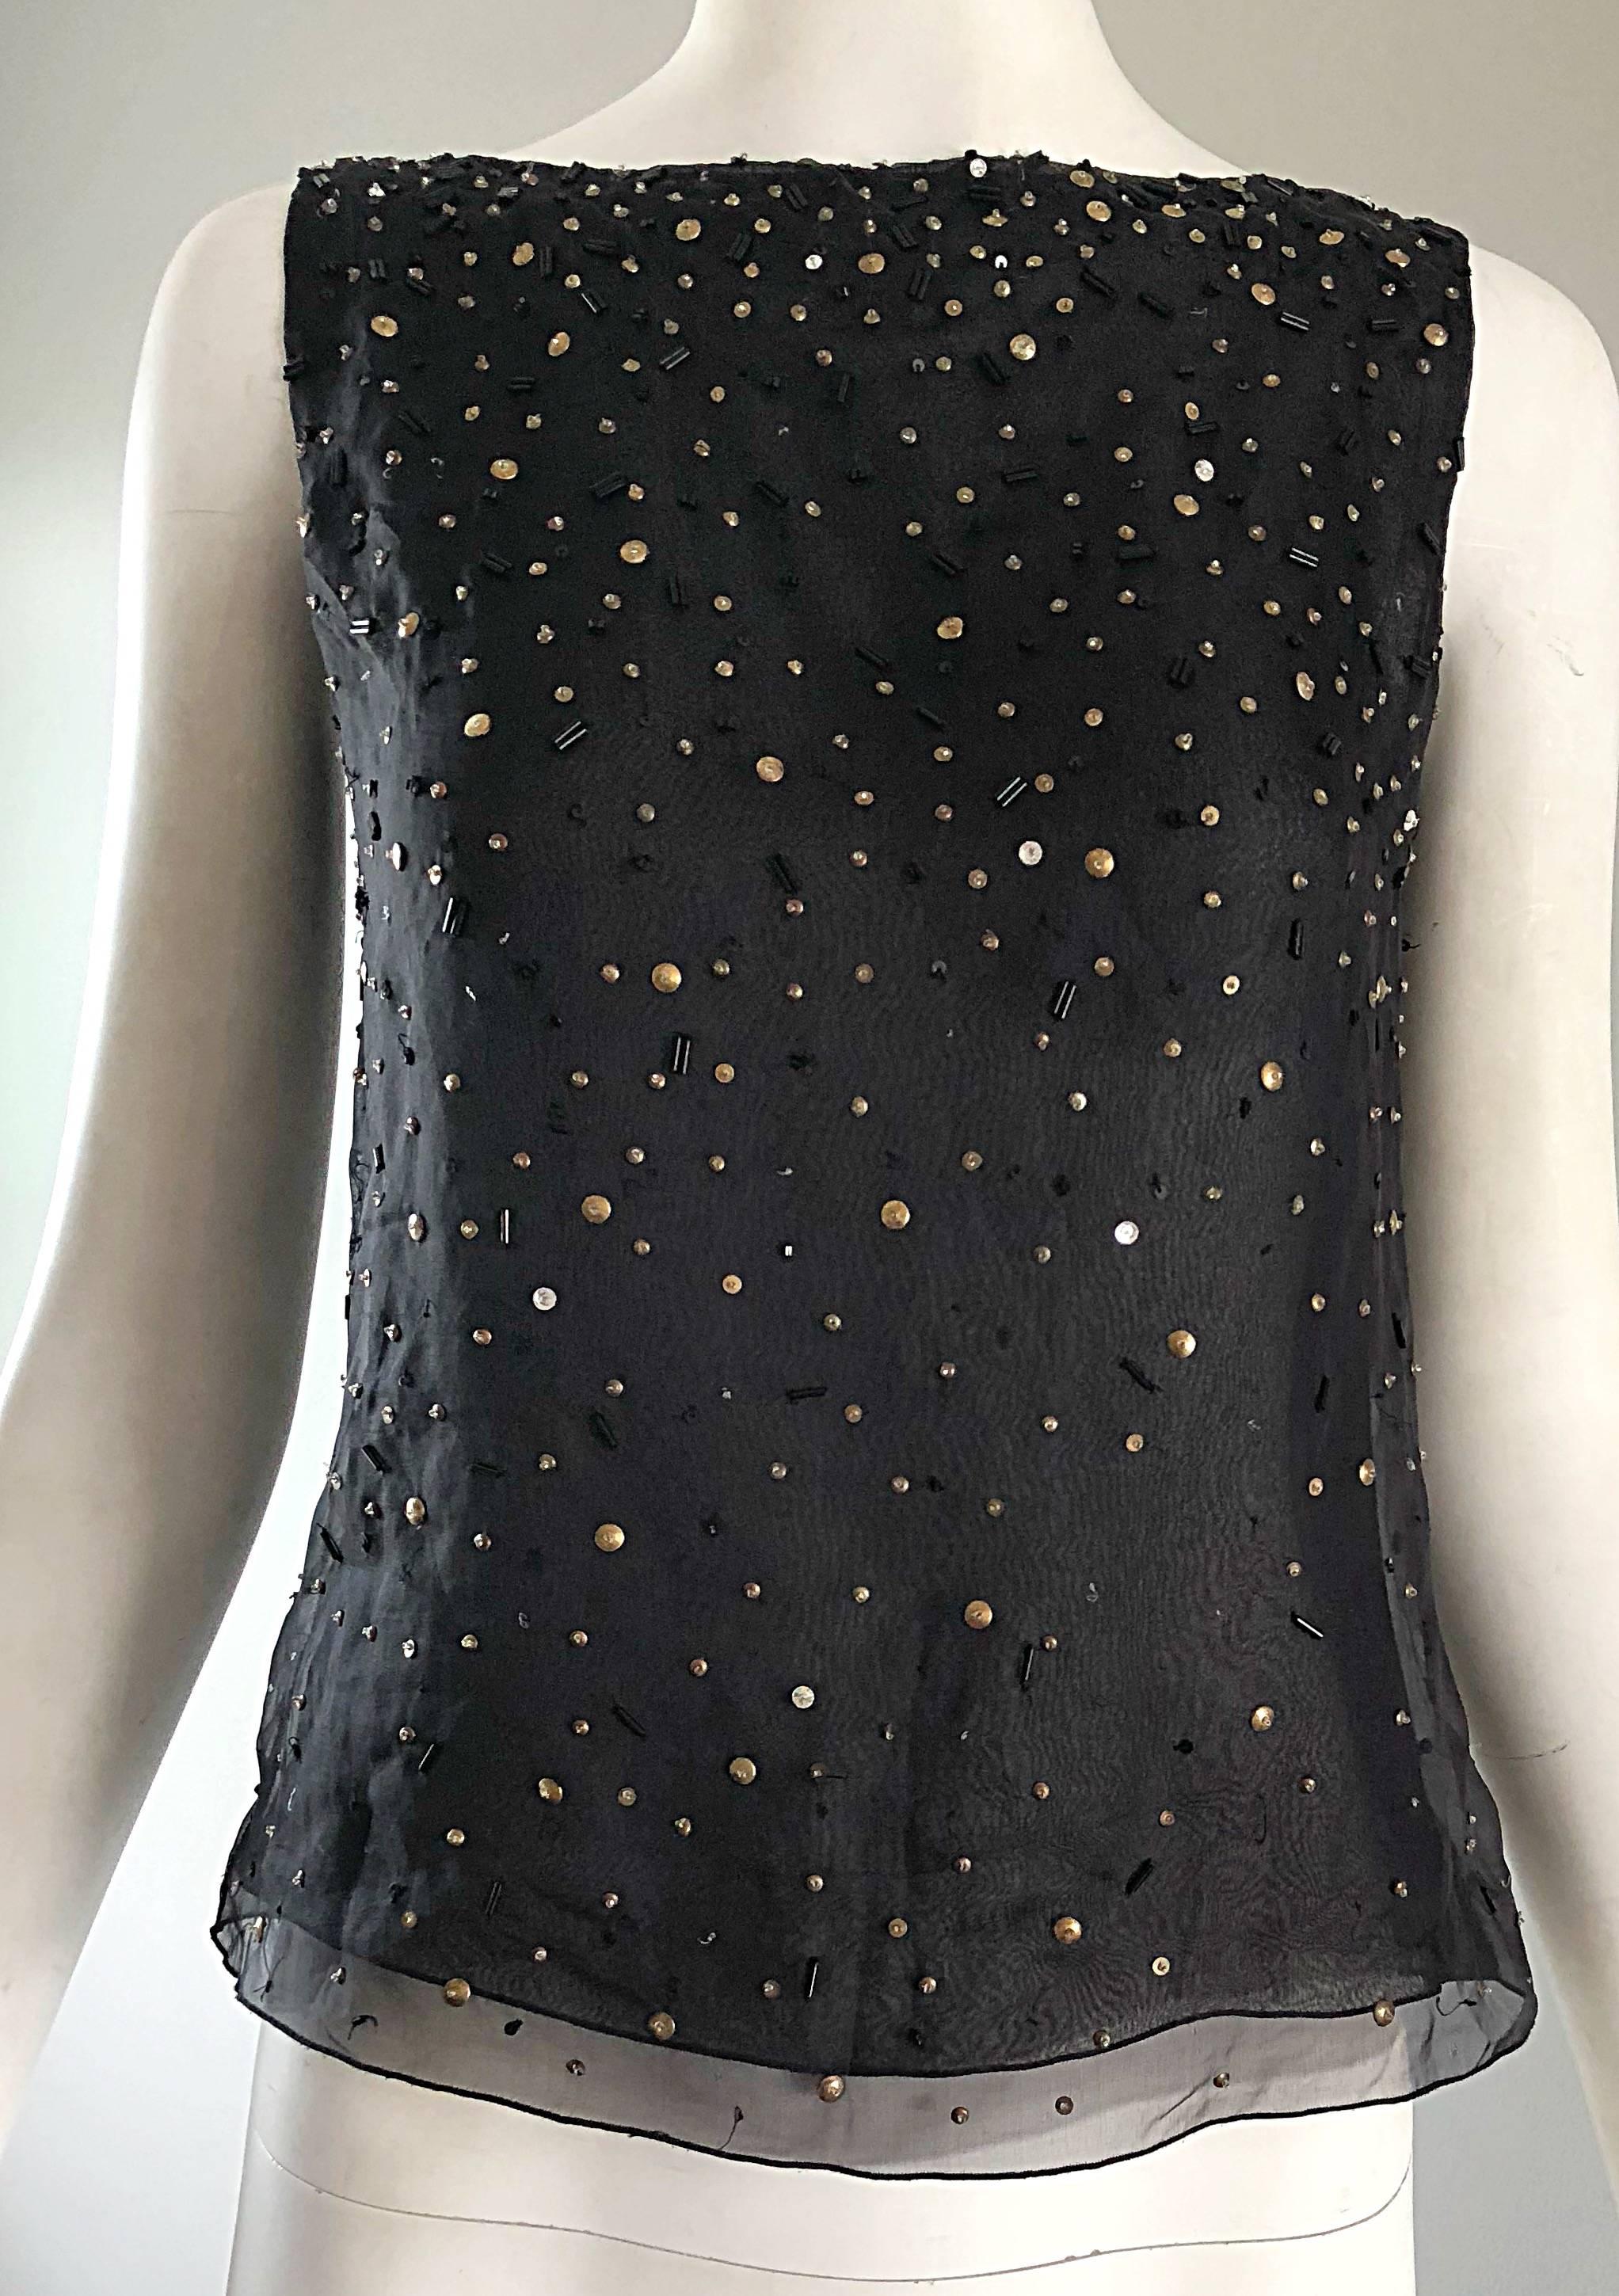 Gianni Versace Genny Black Silk Chiffon Semi Sheer Vintage Shell Blouse, 1990 In Excellent Condition For Sale In San Diego, CA